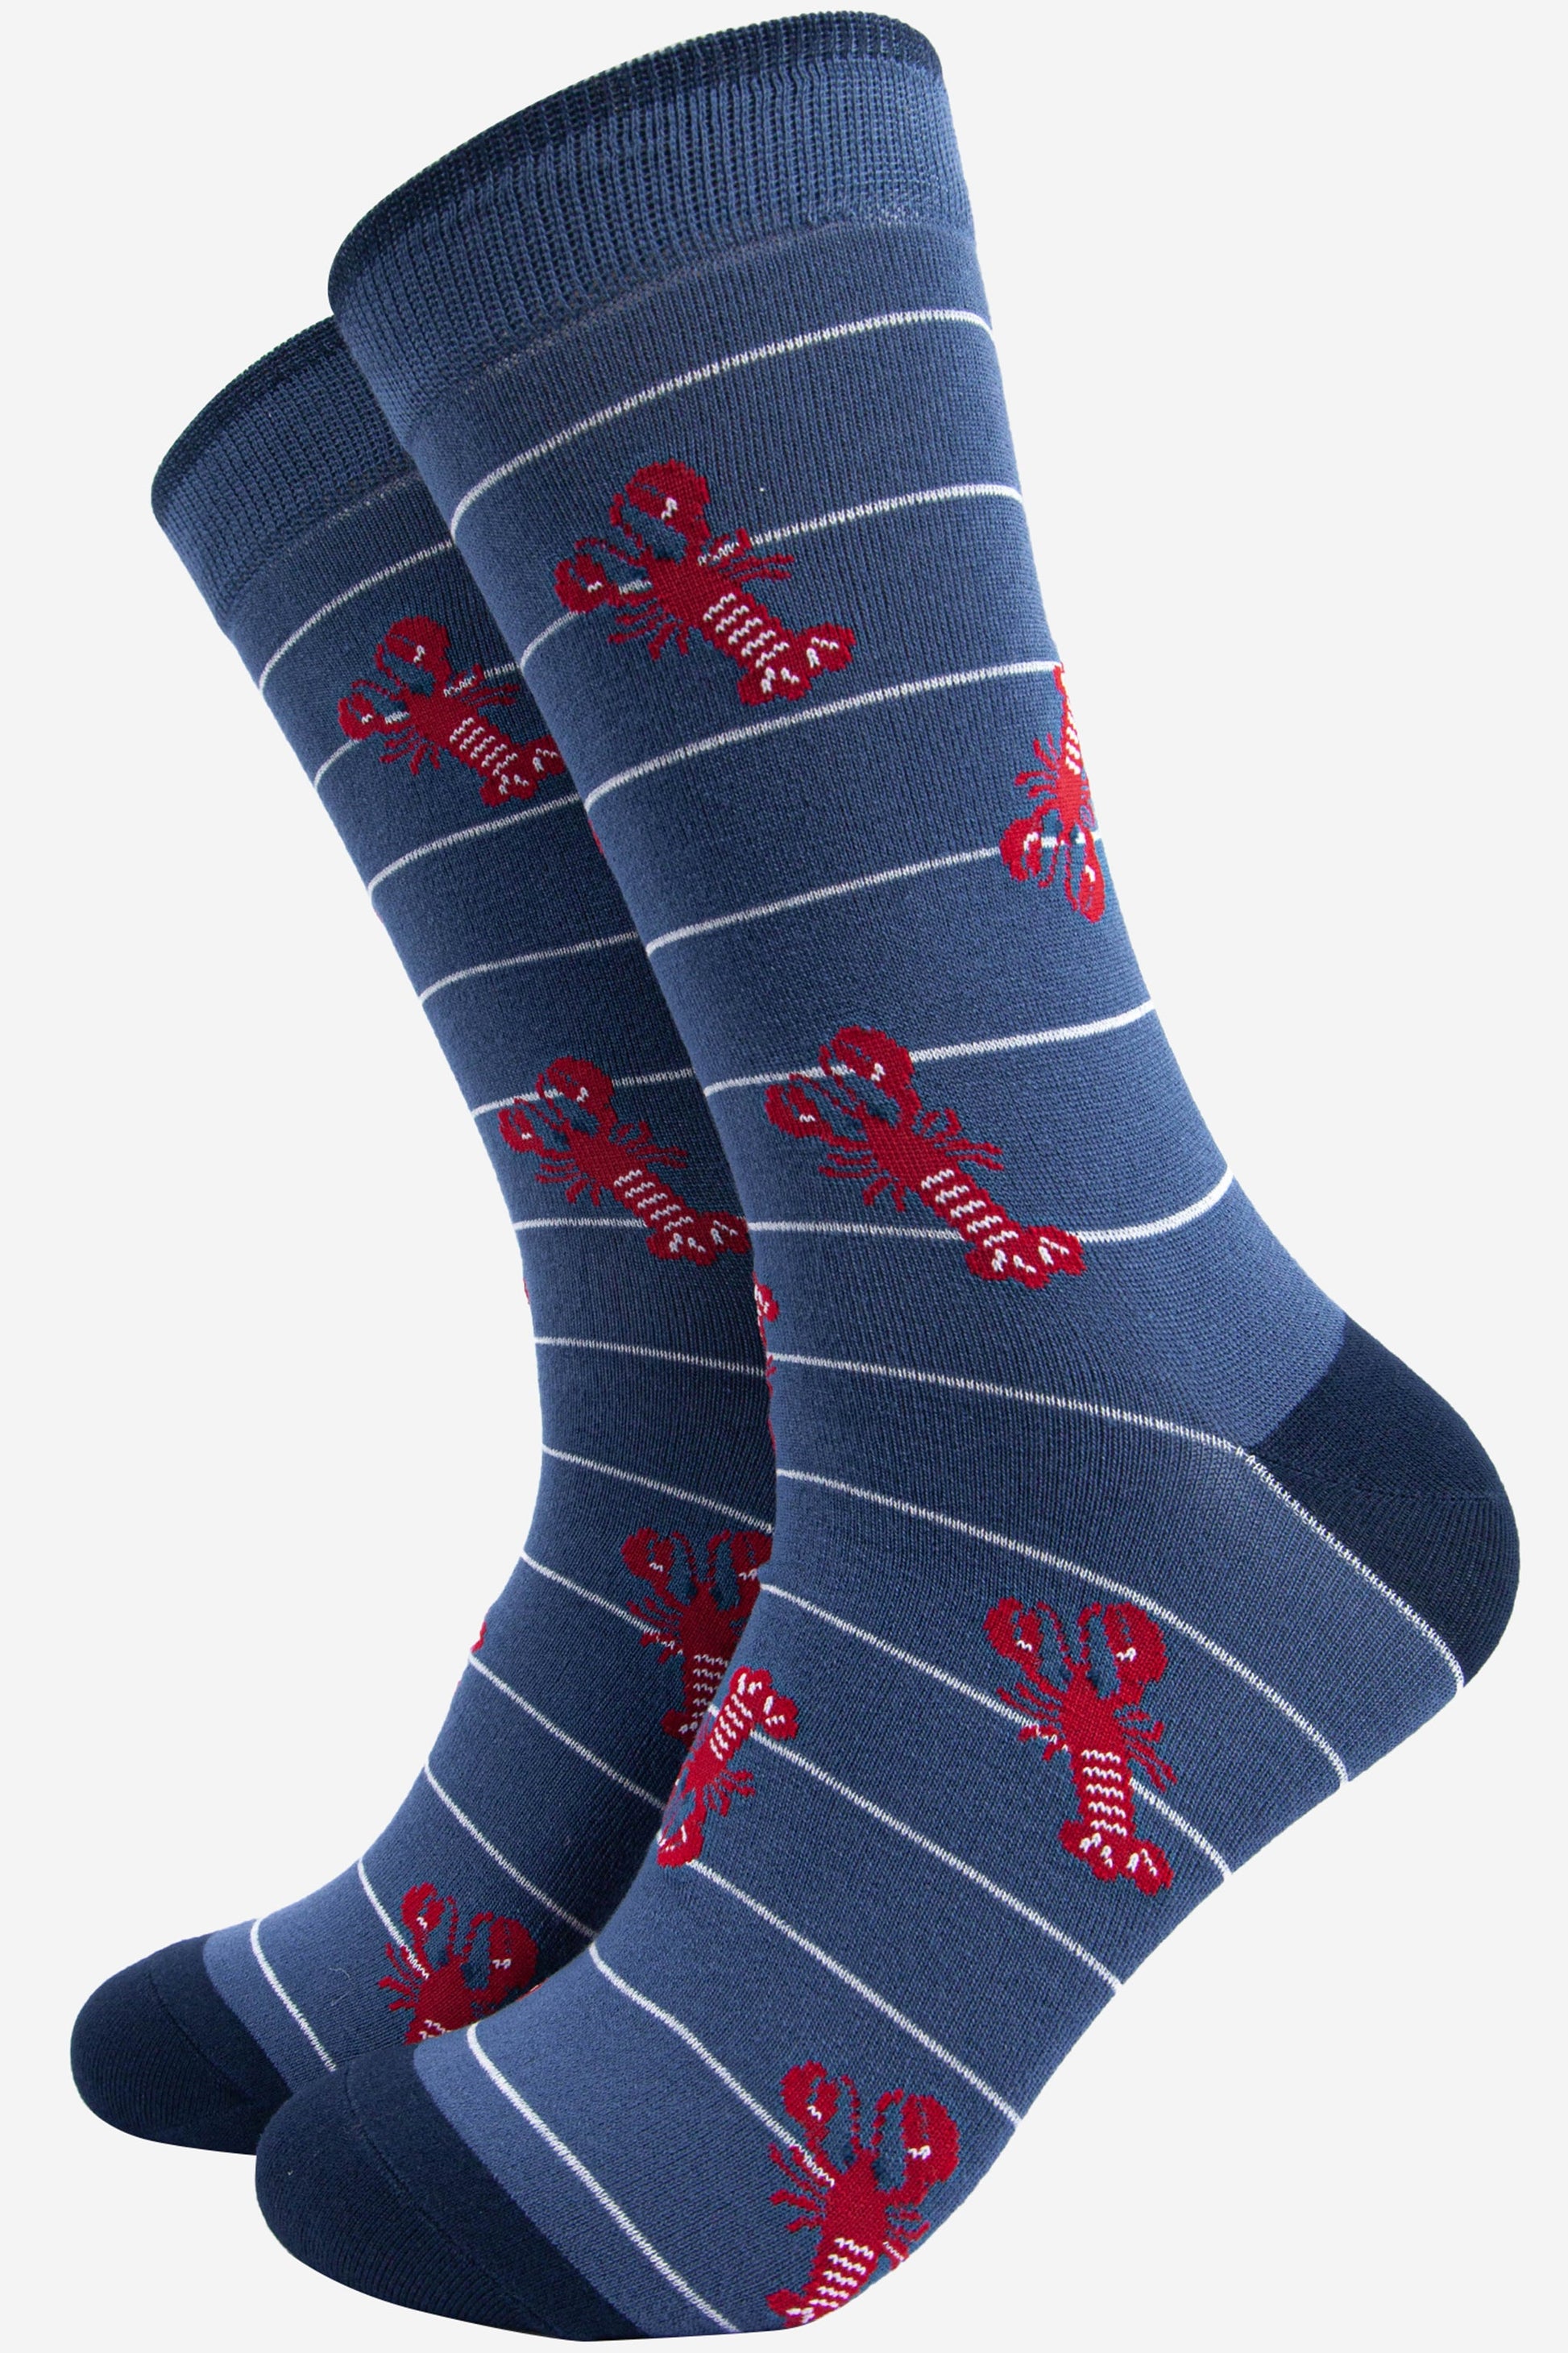  blue socks with white horizontal stripes and an all over red lobster pattern